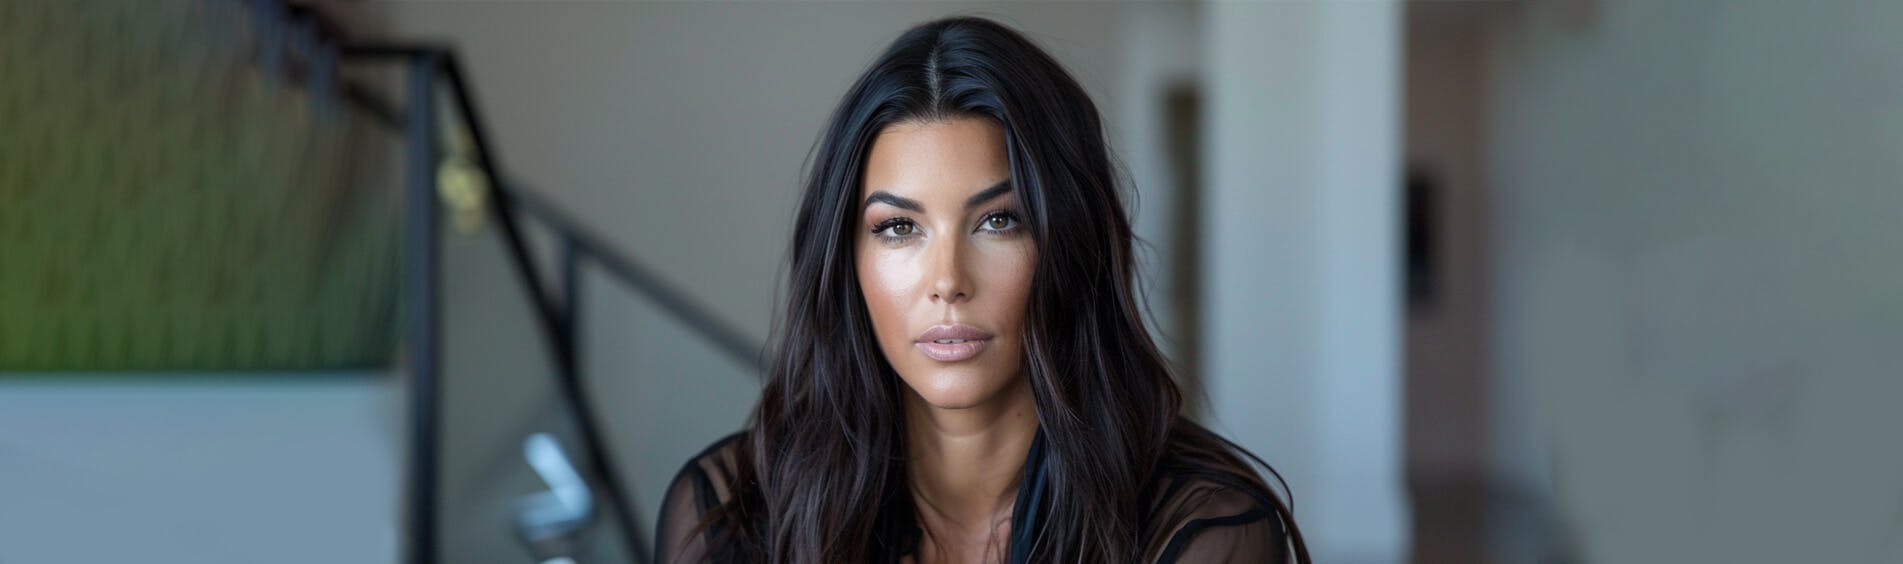 Cover Image for Kourtney Kardashian in a Bikini: Shared a Series of Photos From Her Birthday Celebration